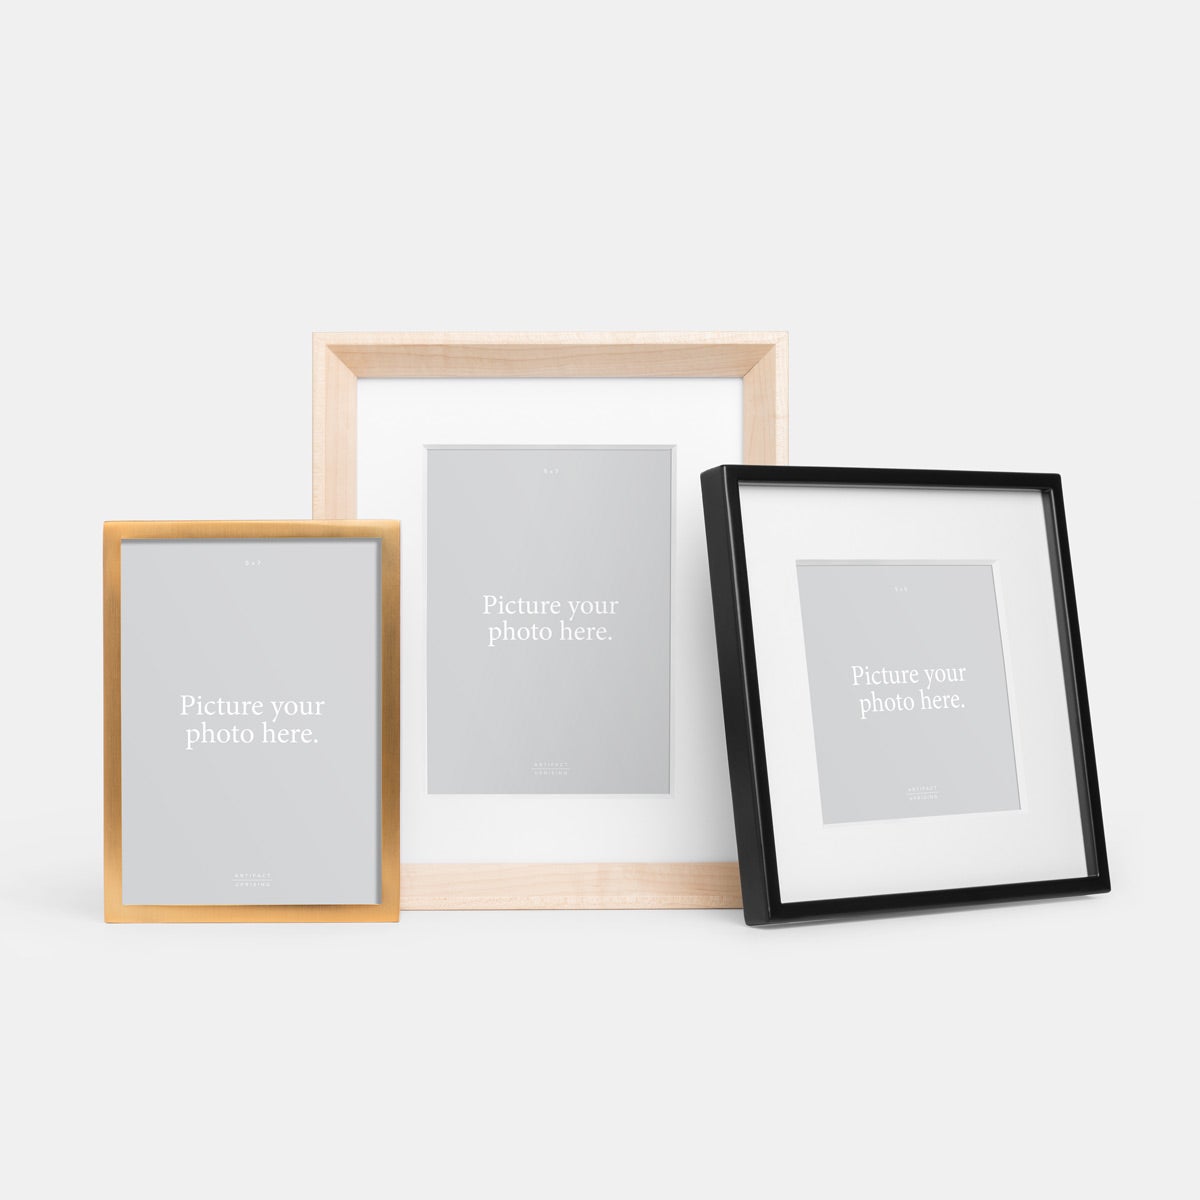 Tabletop Frames without Prints by Artifact Uprising | Frames